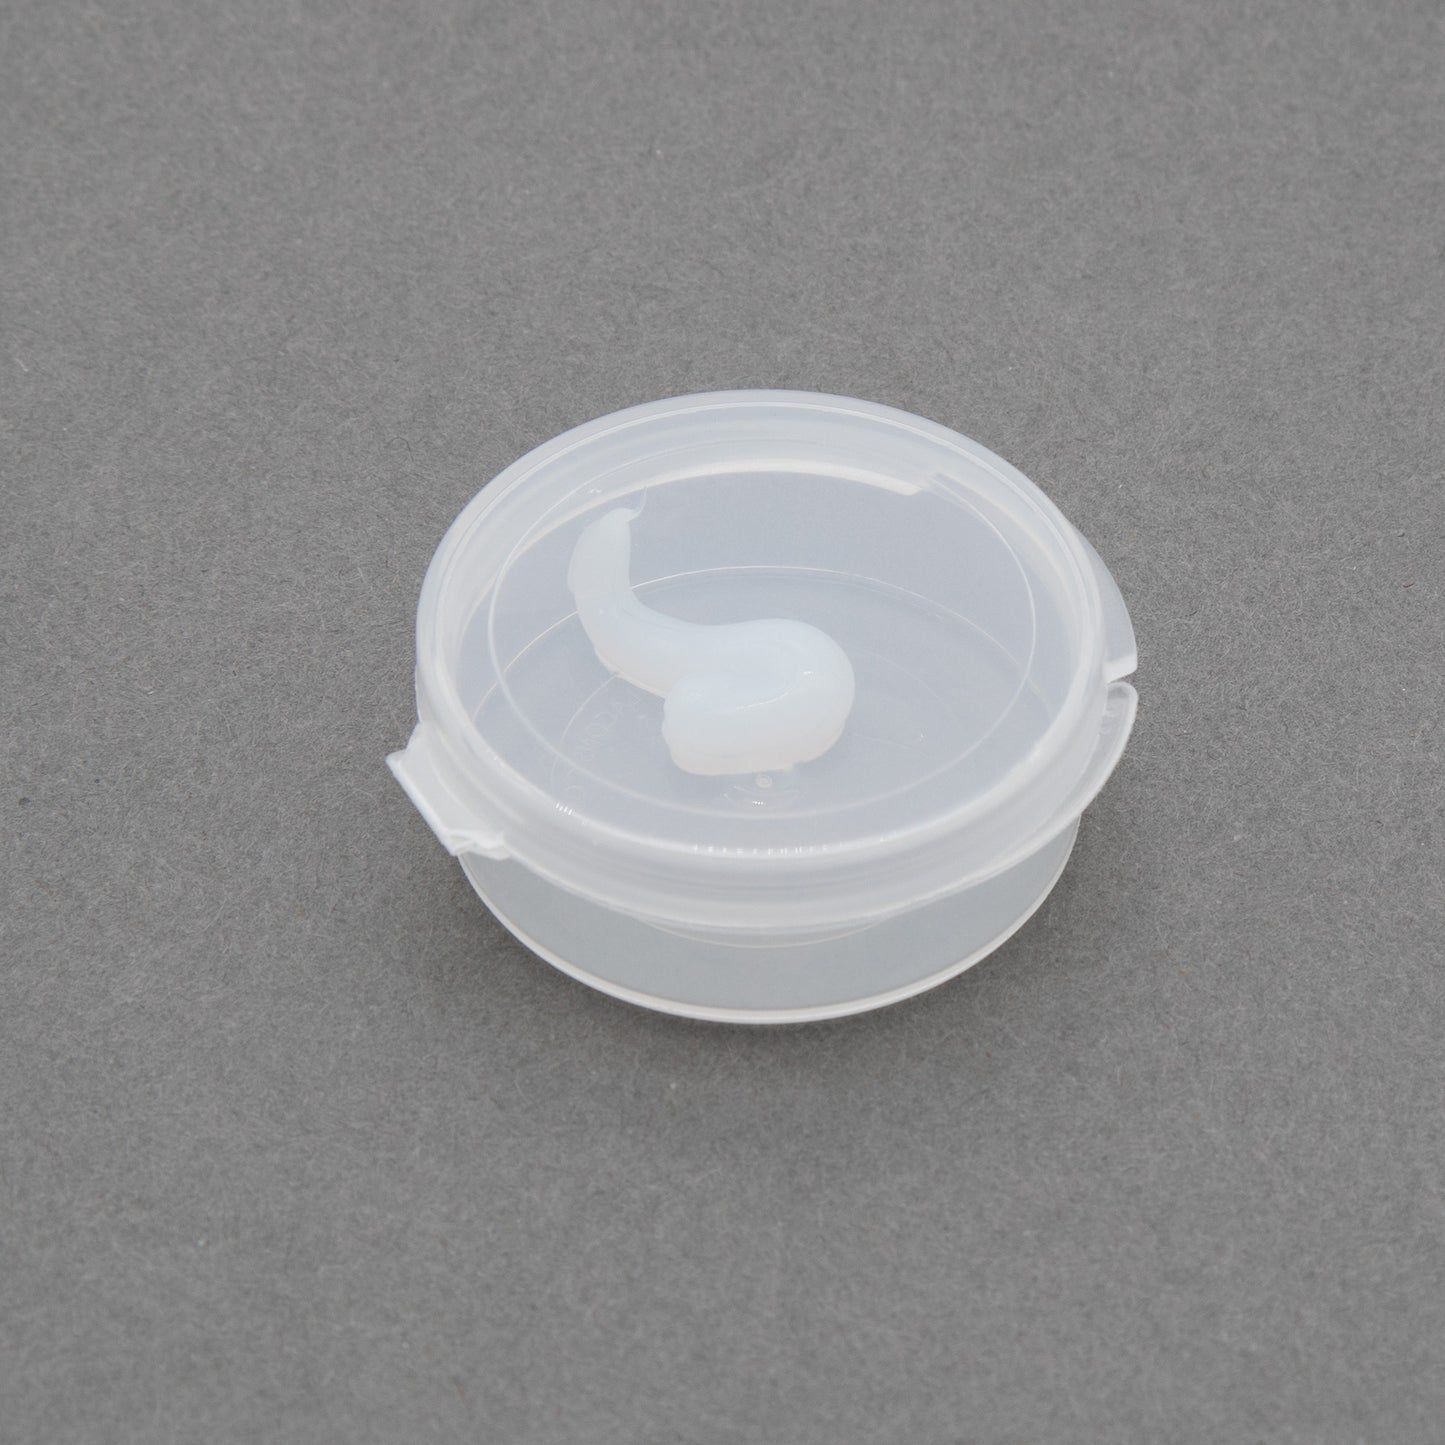 A plastic container with gel inside